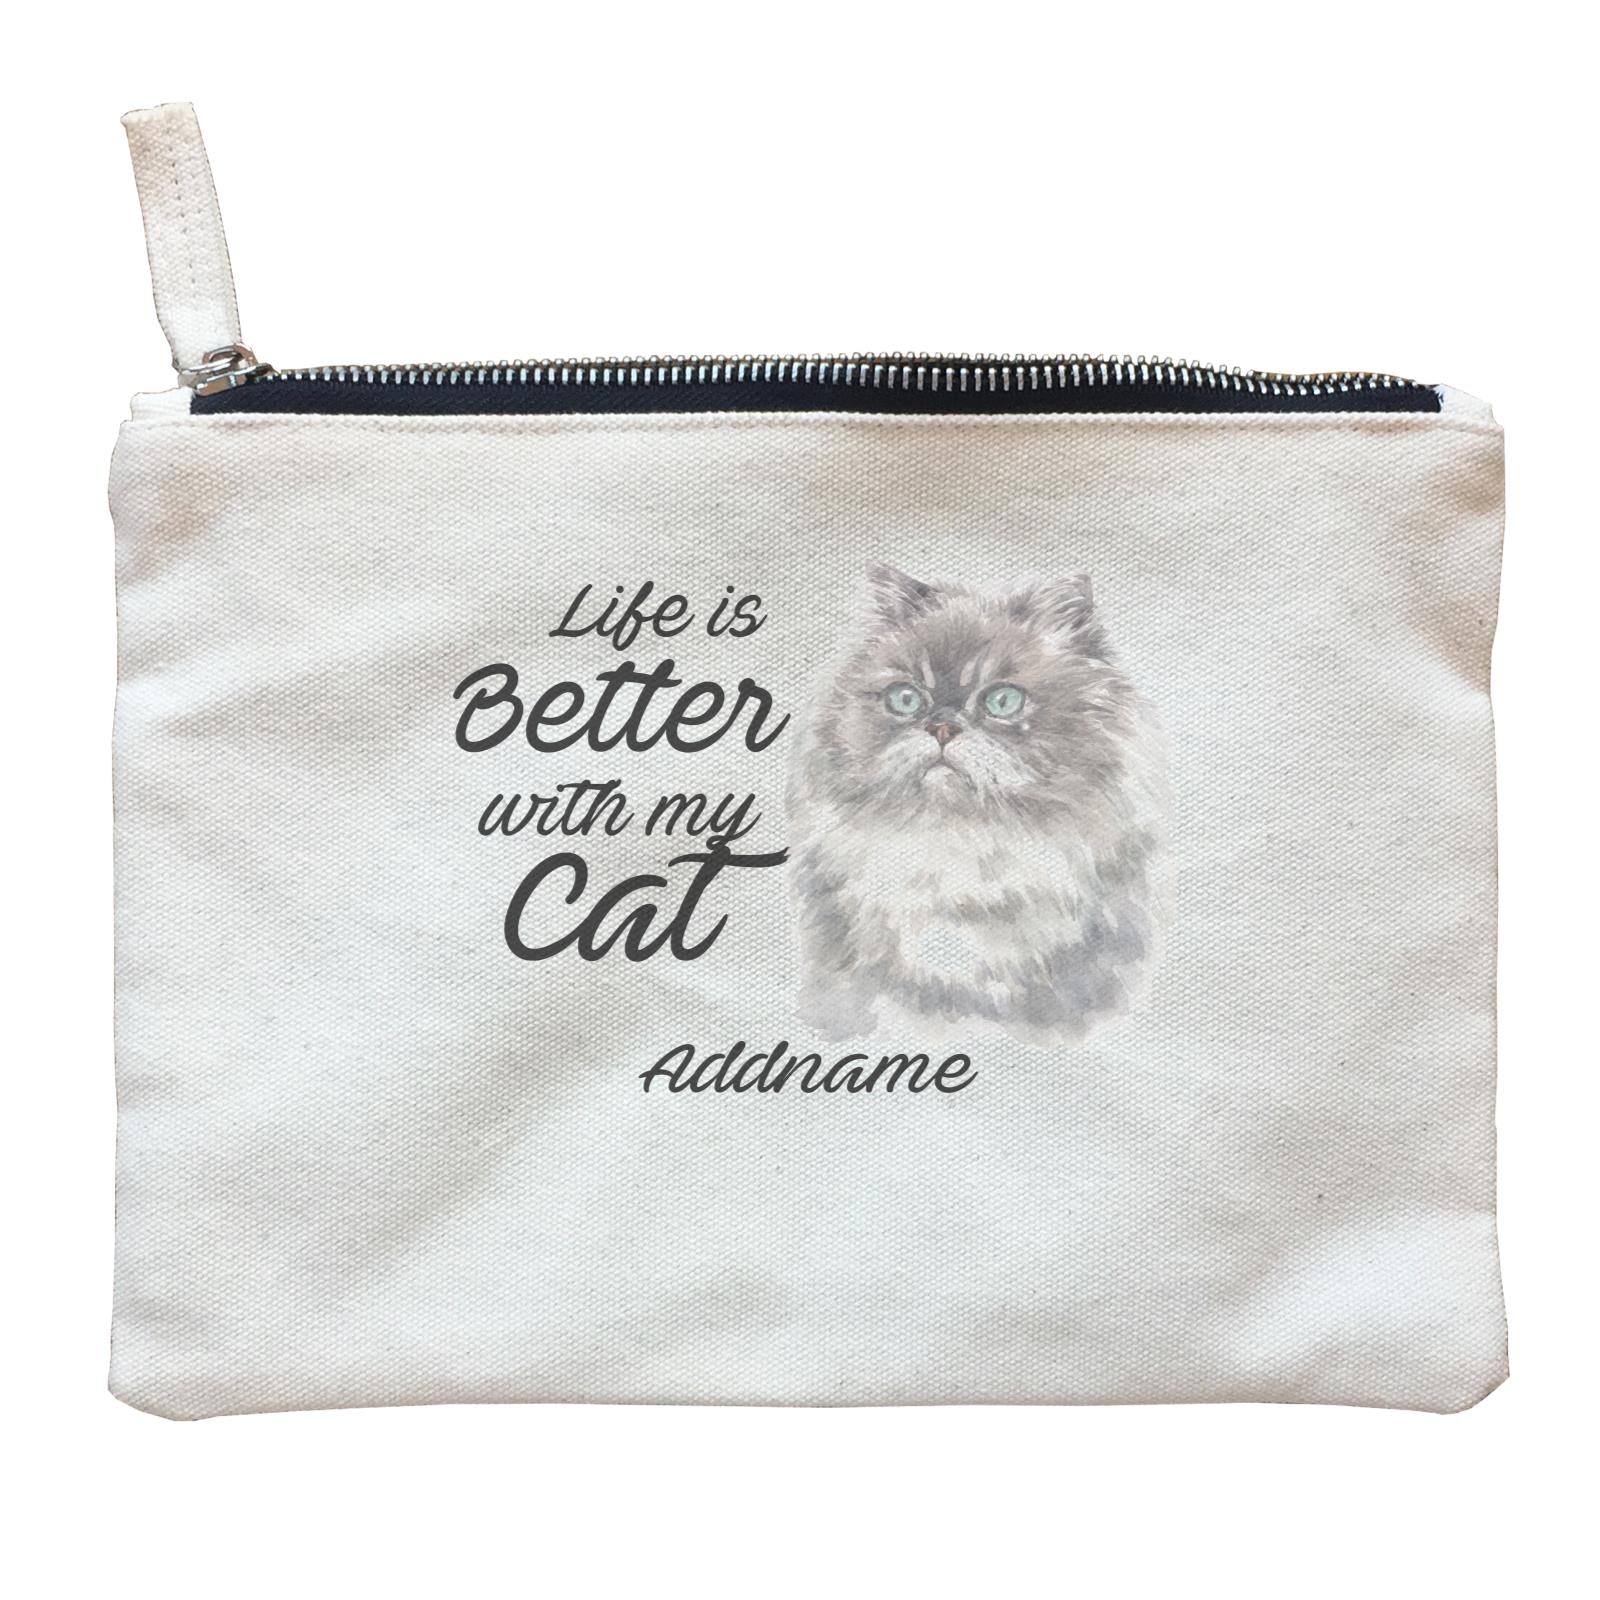 Watercolor Life is Better With My Cat Himalayan Addname Zipper Pouch